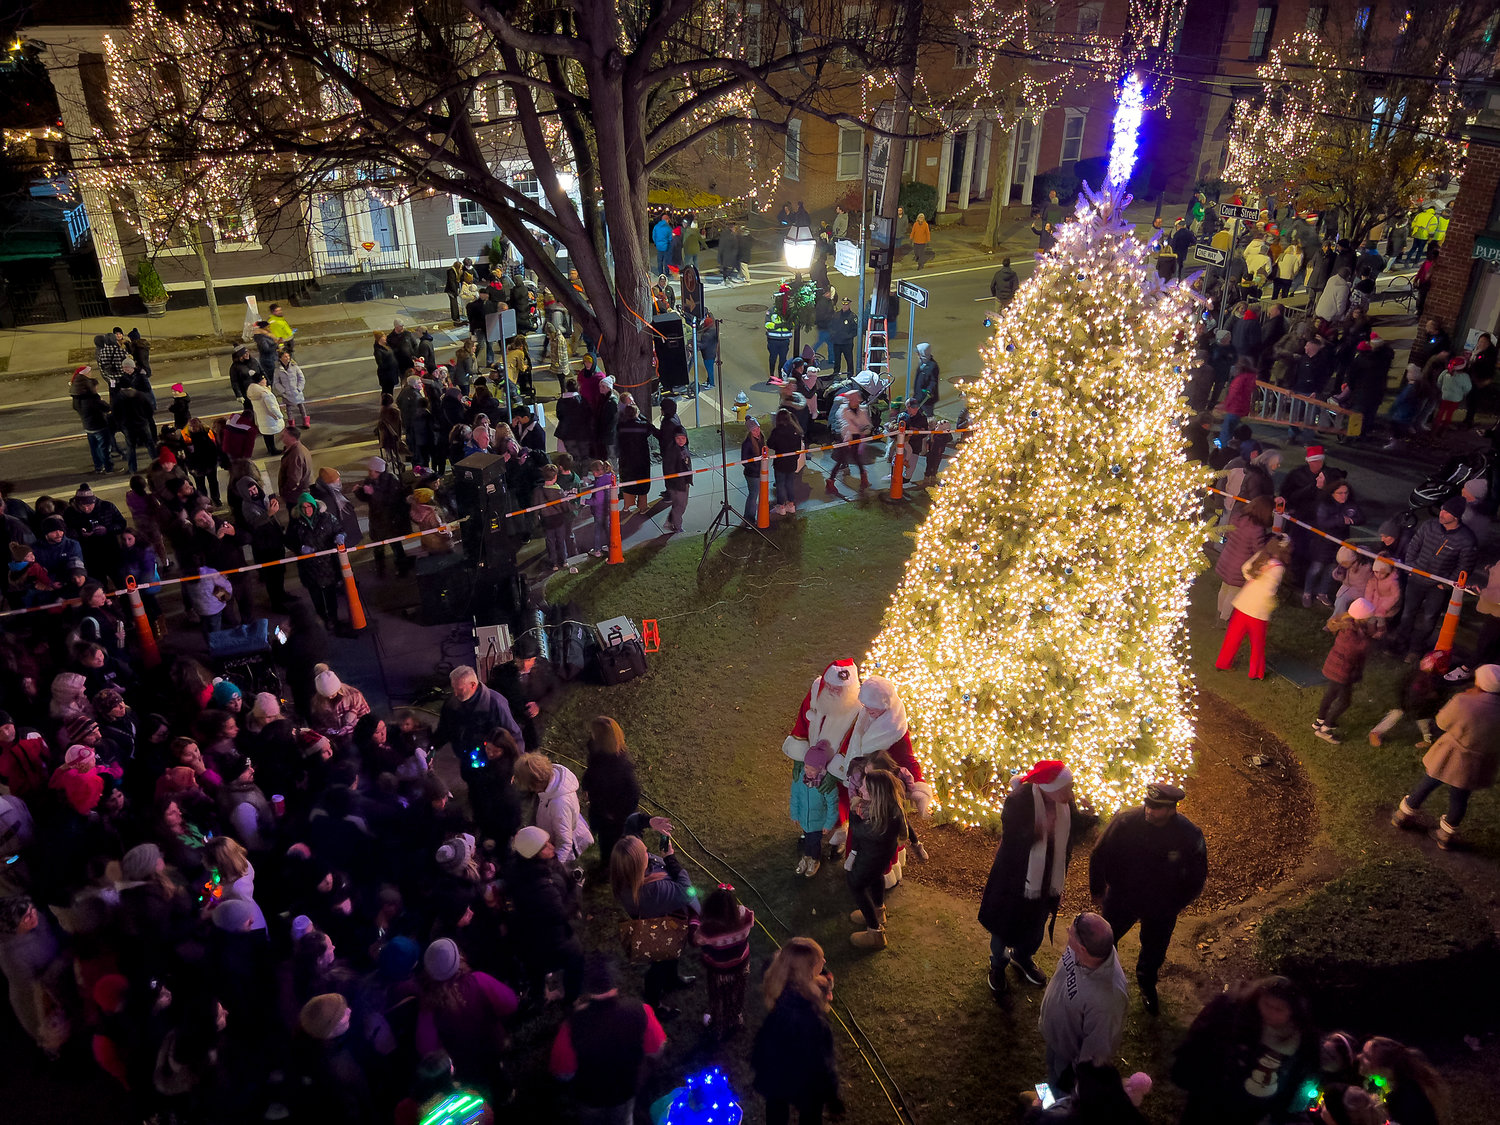 The new tree is lit for the first time, with a large crowd gathered around to witness.